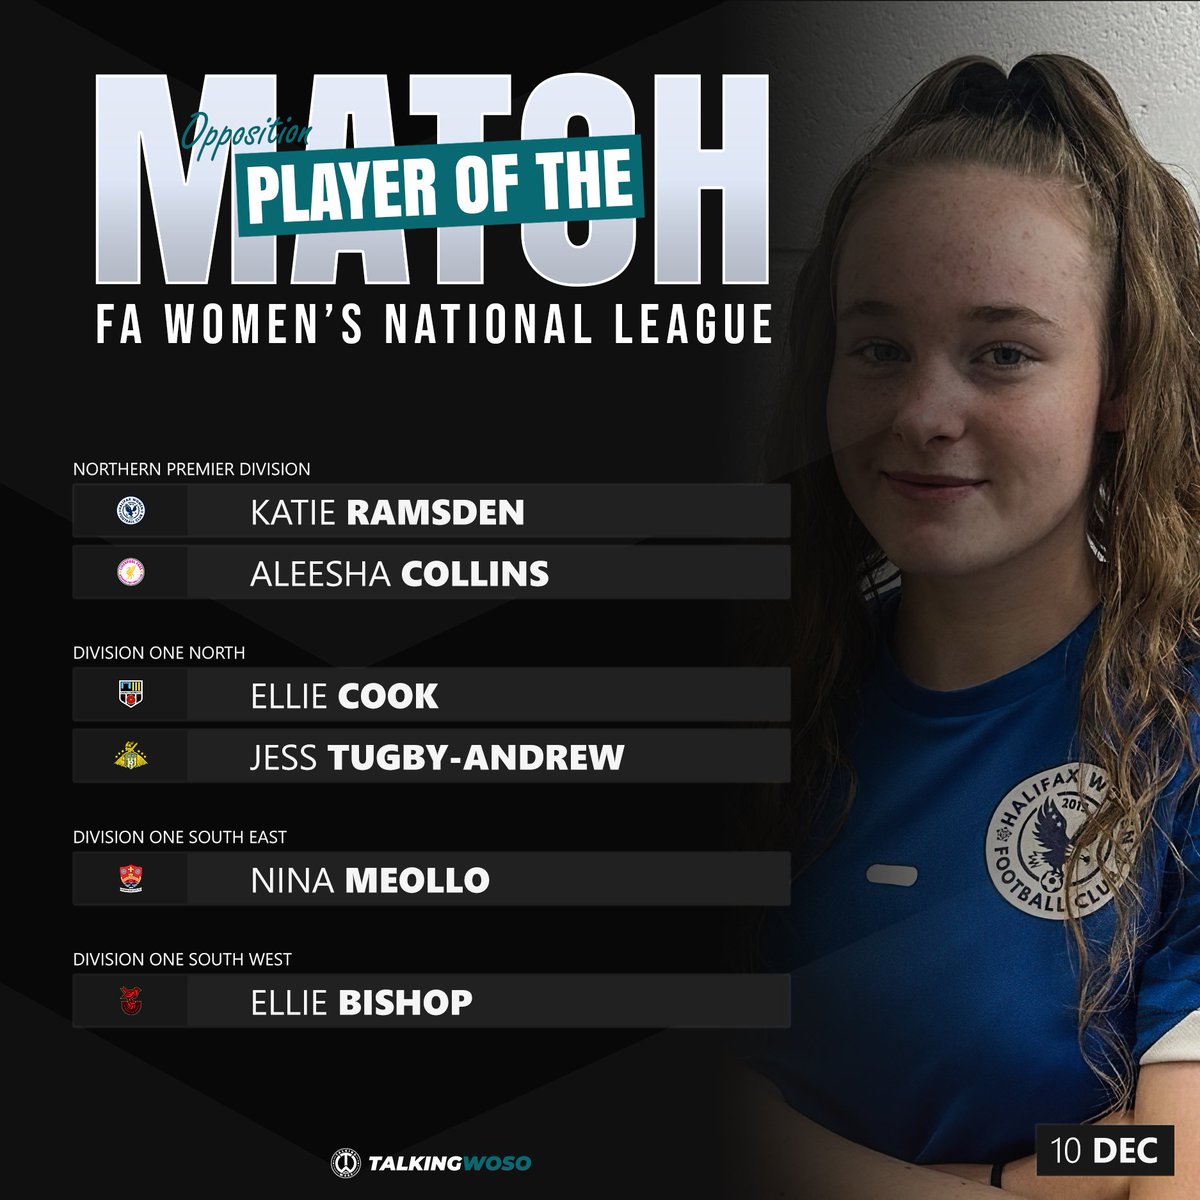 𝗢𝗣𝗣 𝗣𝗢𝗧𝗠 | FA Women's National League The standout performers in the FAWNL on Sunday 10th December as chosen by the opposition. 💥 📸 @halifaxfcwomen